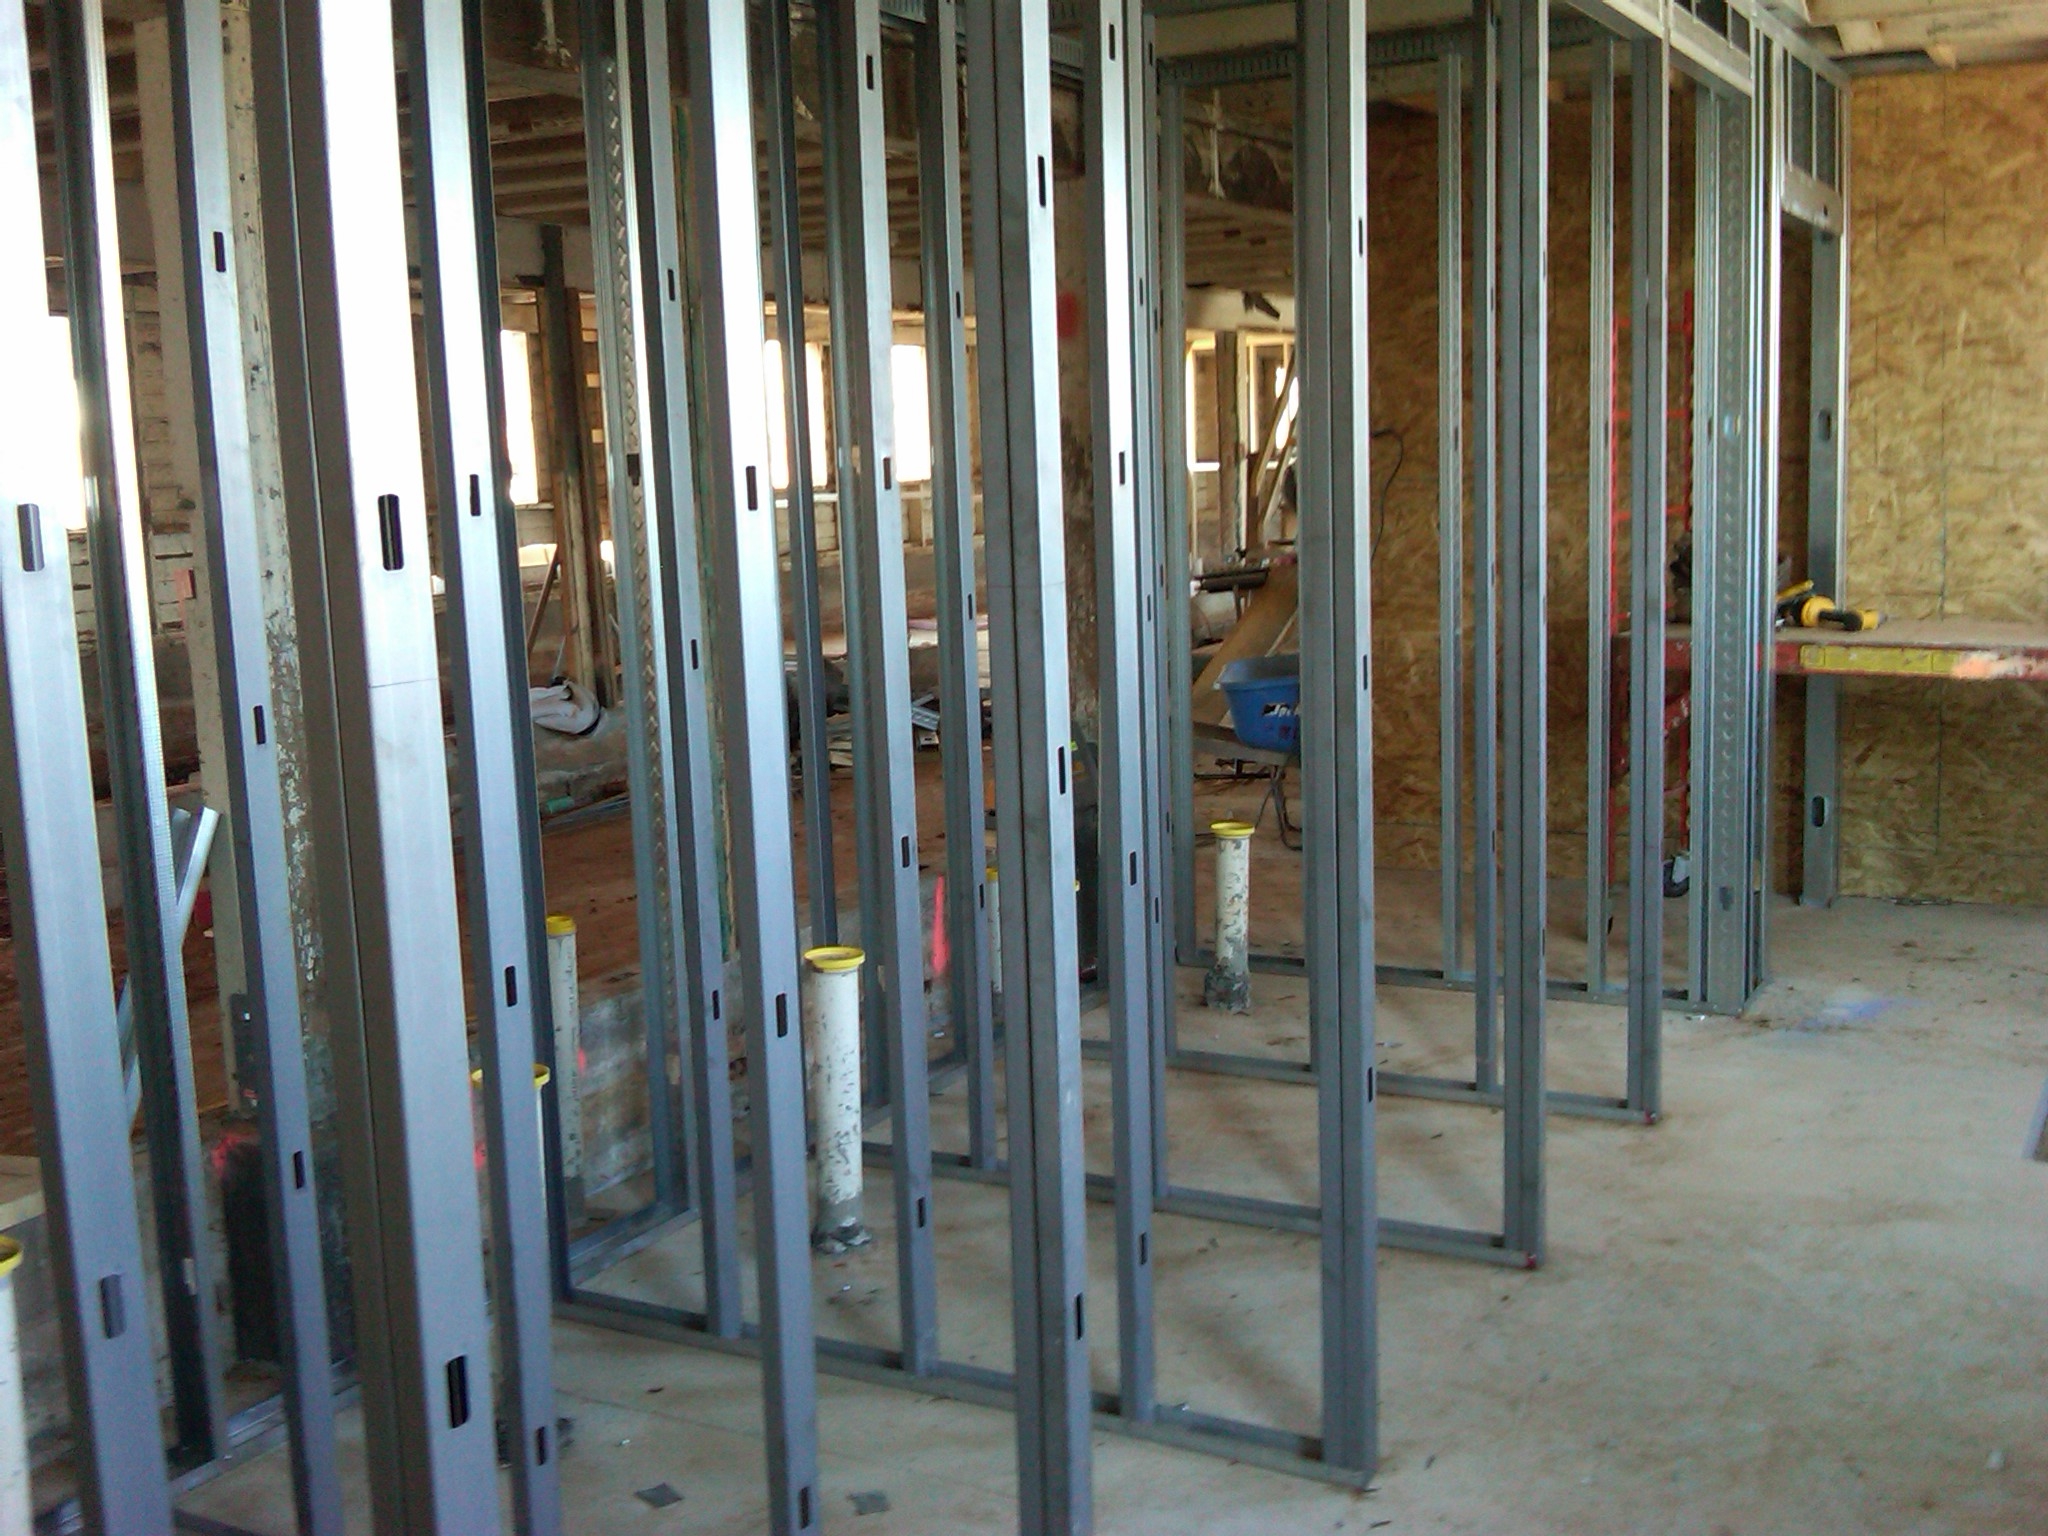 Our downstairs restrooms are starting to take shape!